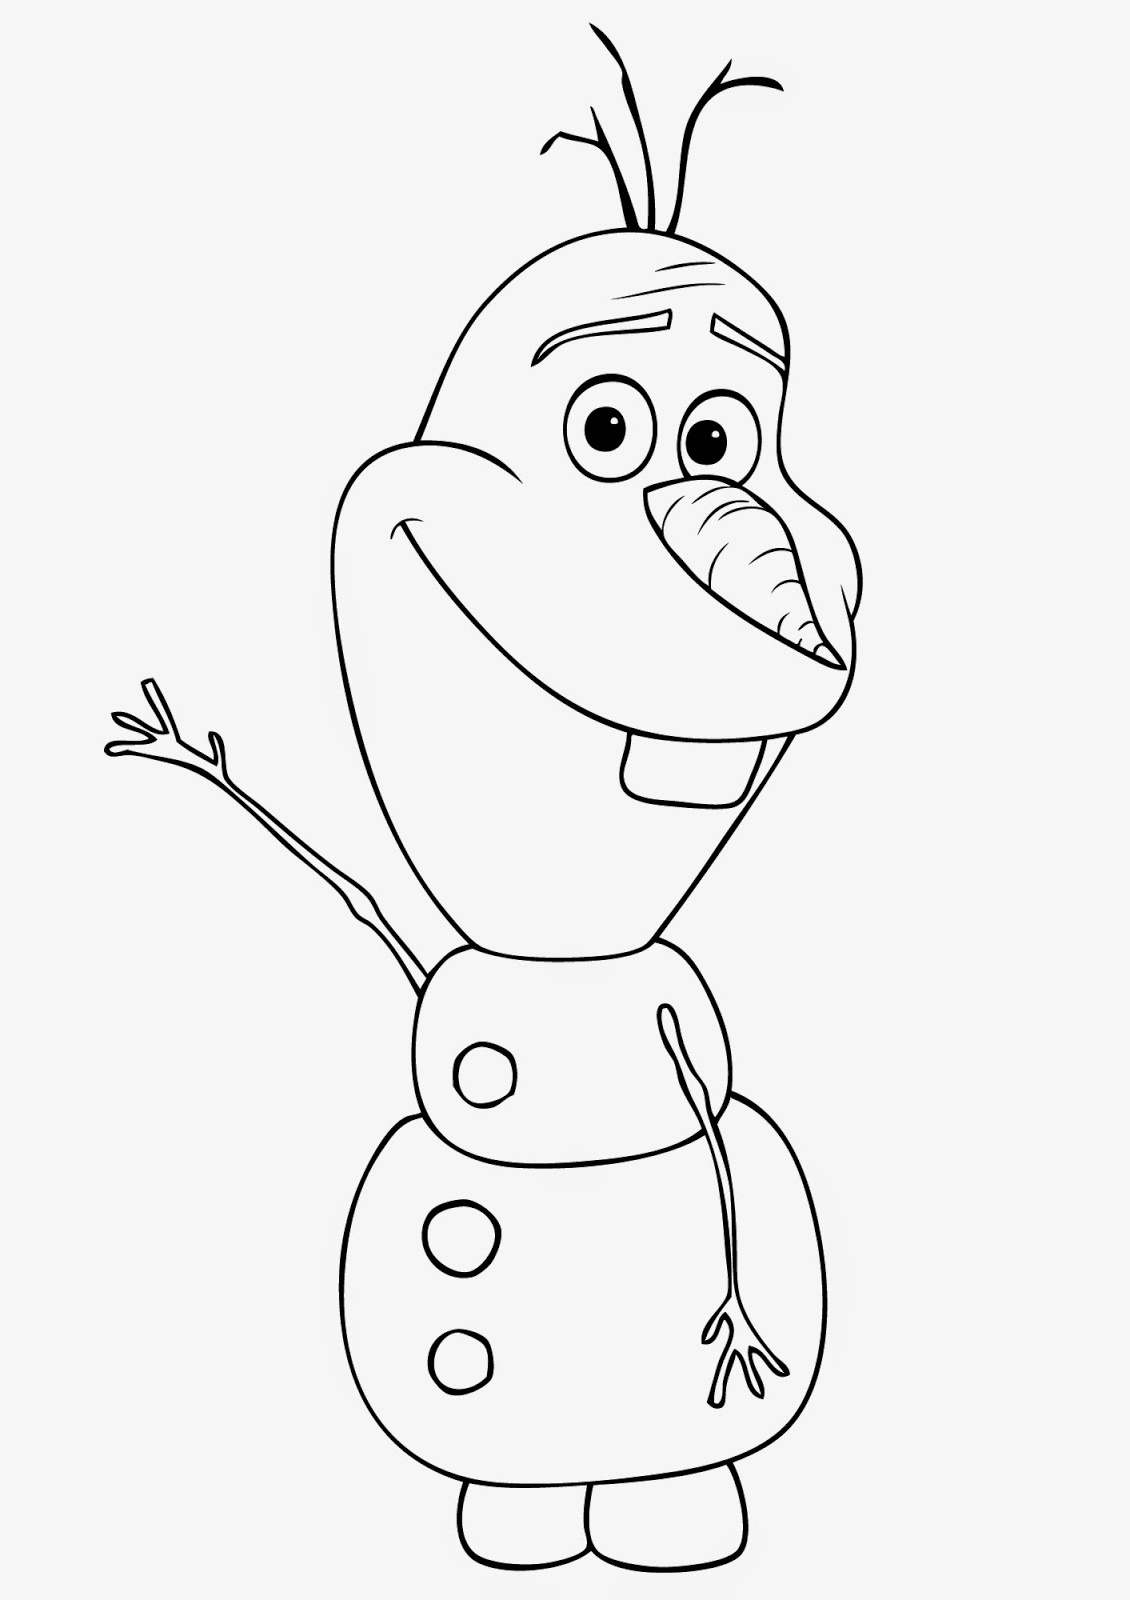 Olaf Dessin Luxe Image Frozens Olaf Coloring Pages Best Coloring Pages for Kids